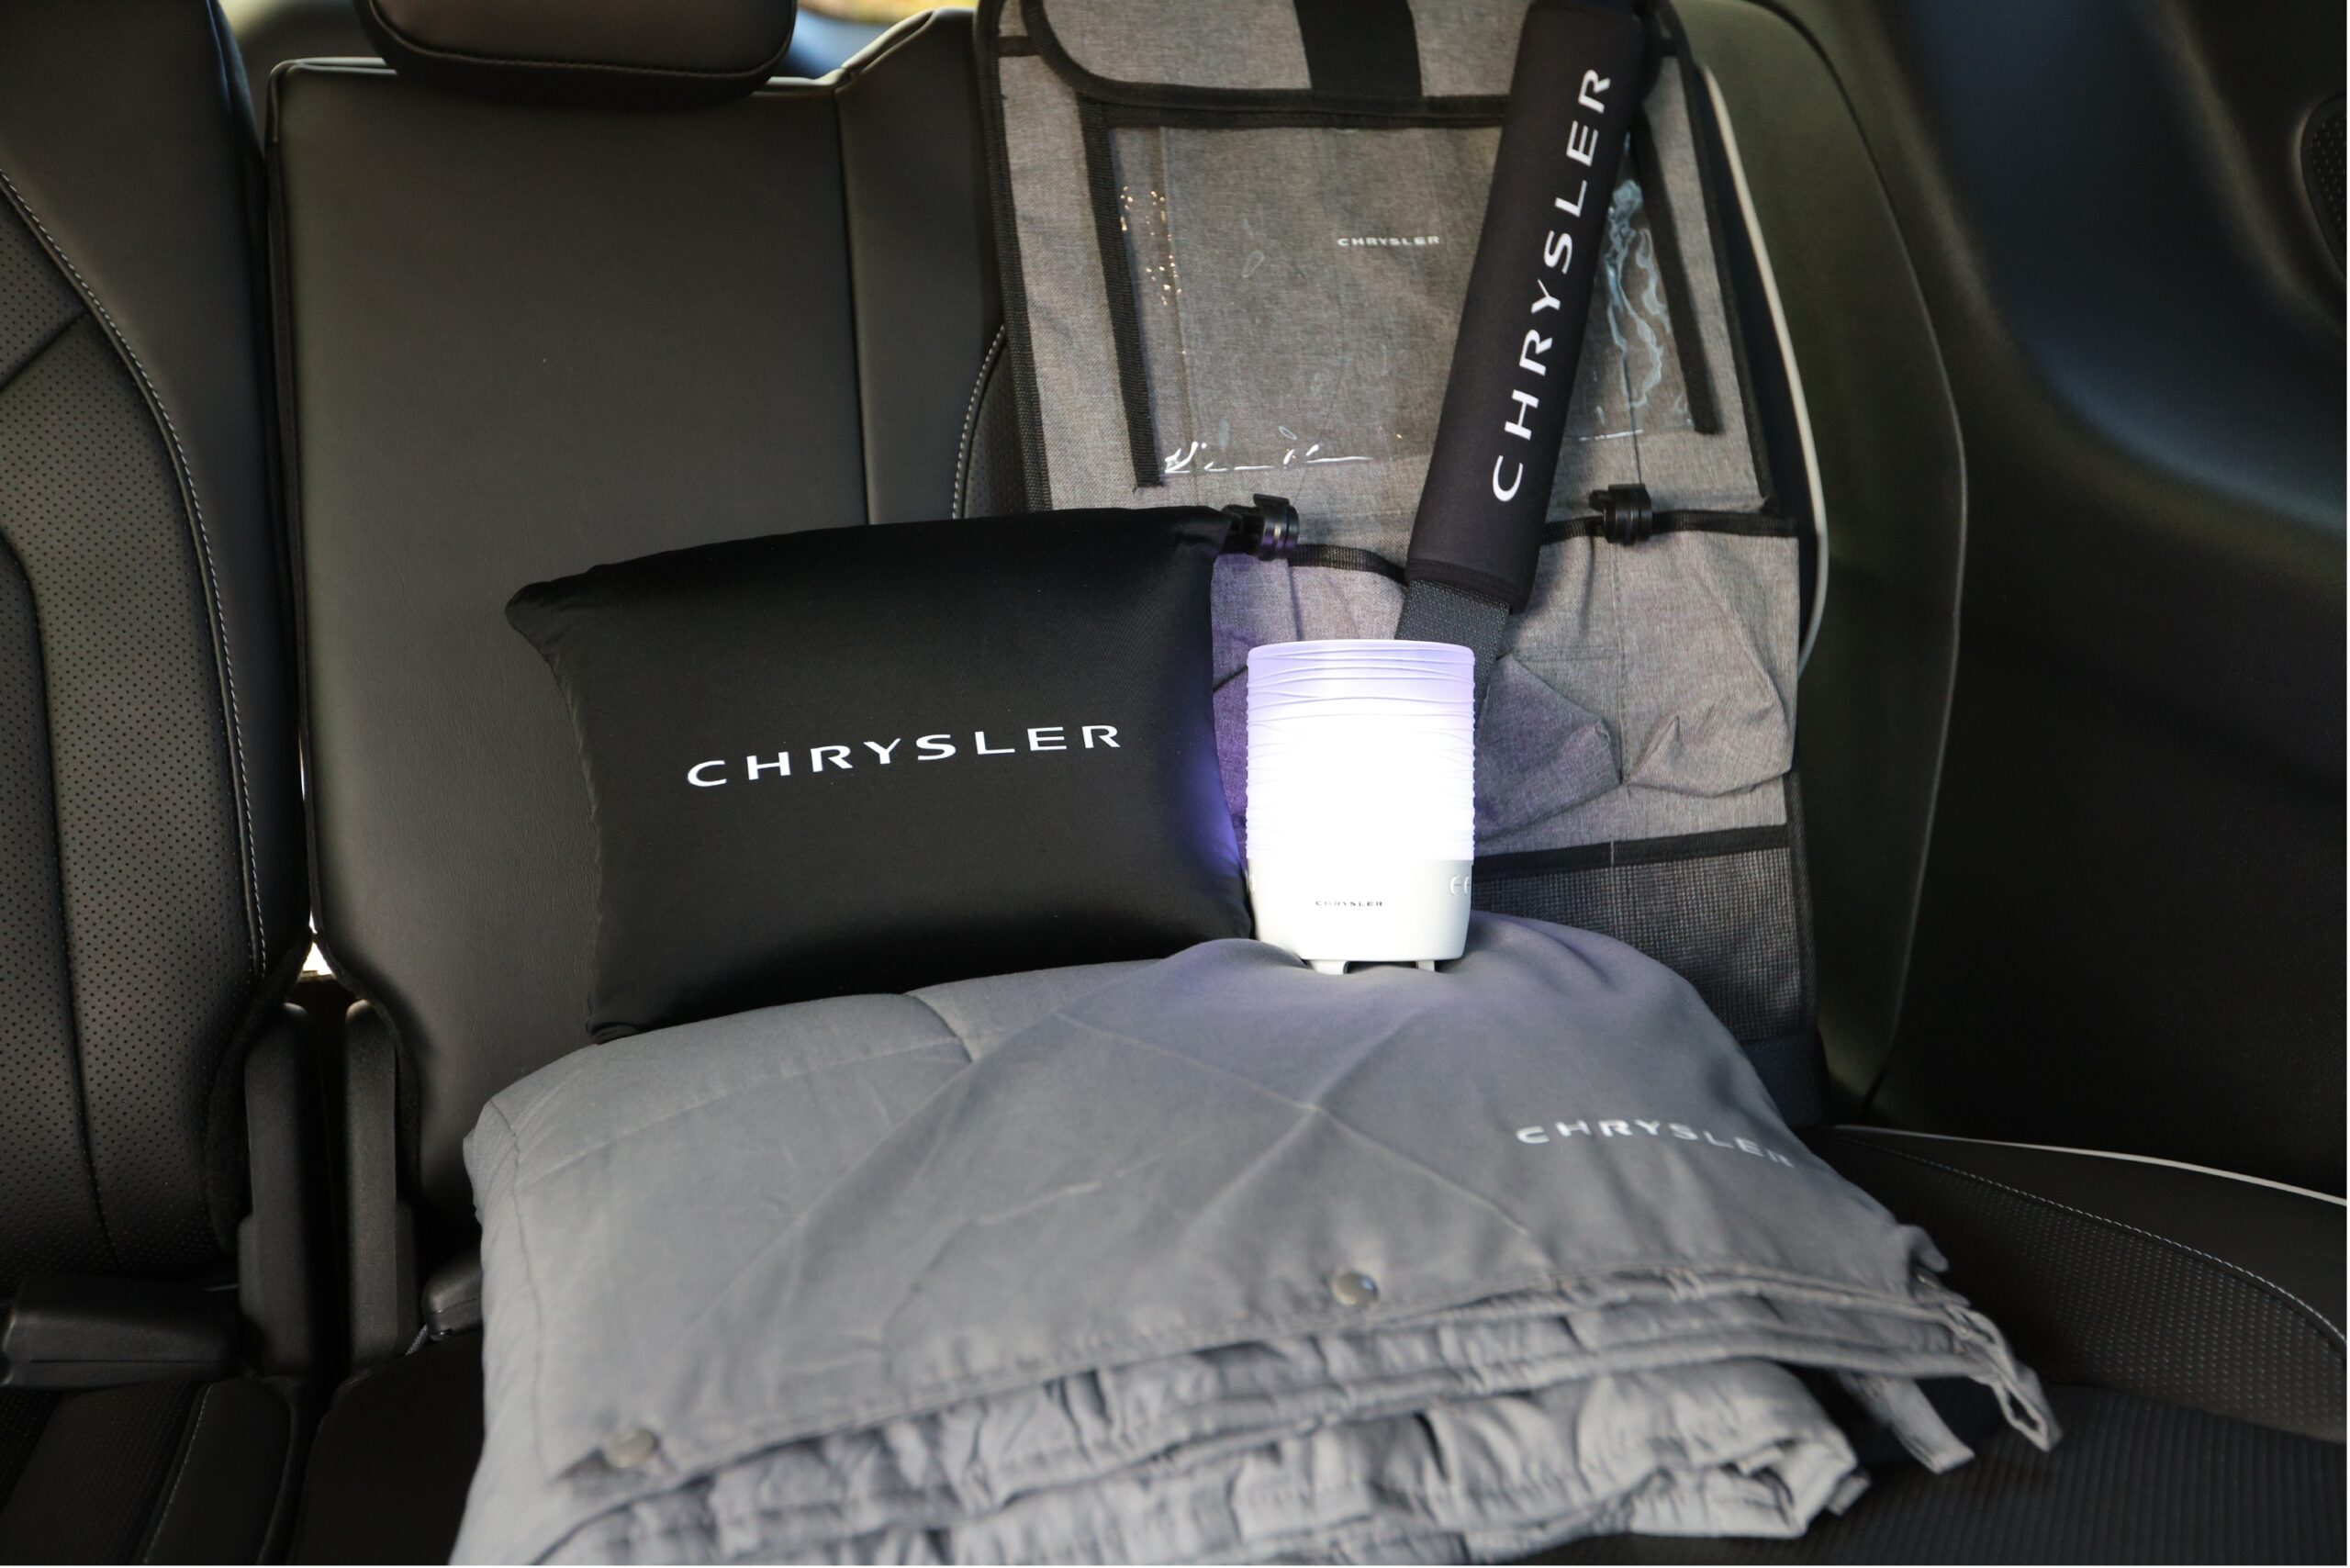 Elements of the Chrysler Calm Cabin package, including a weighted blanket, pillow, sound machine, seat back organizer, and seat belt sleeve. 